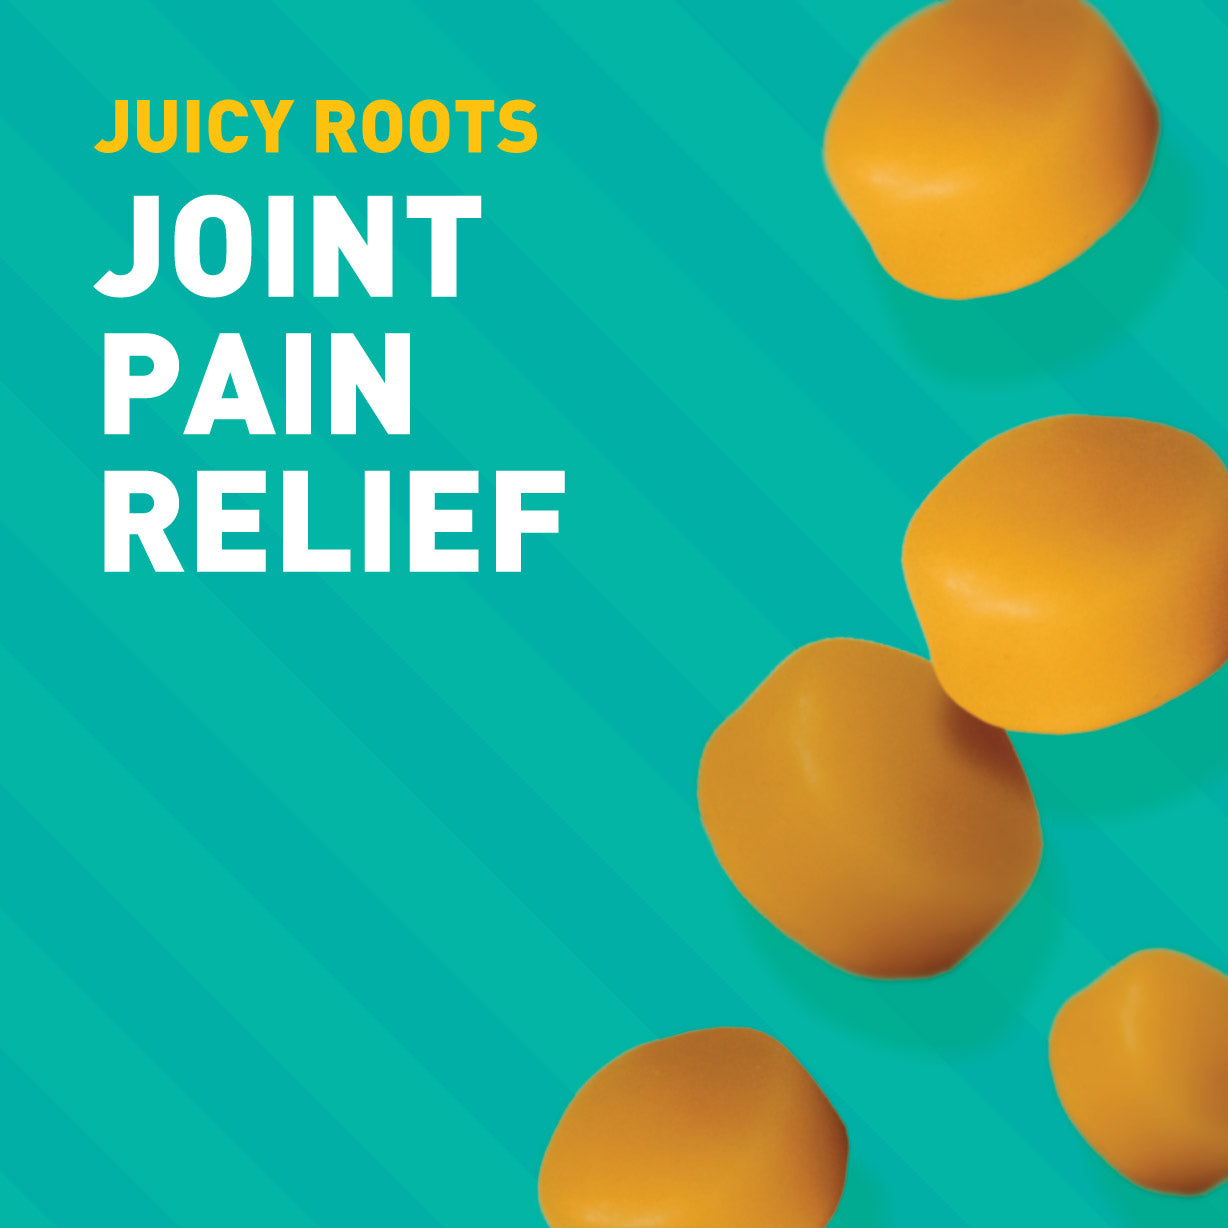 Chewable turmeric and ginger supplement to help reduce joint pain and inflammation associated with arthritis